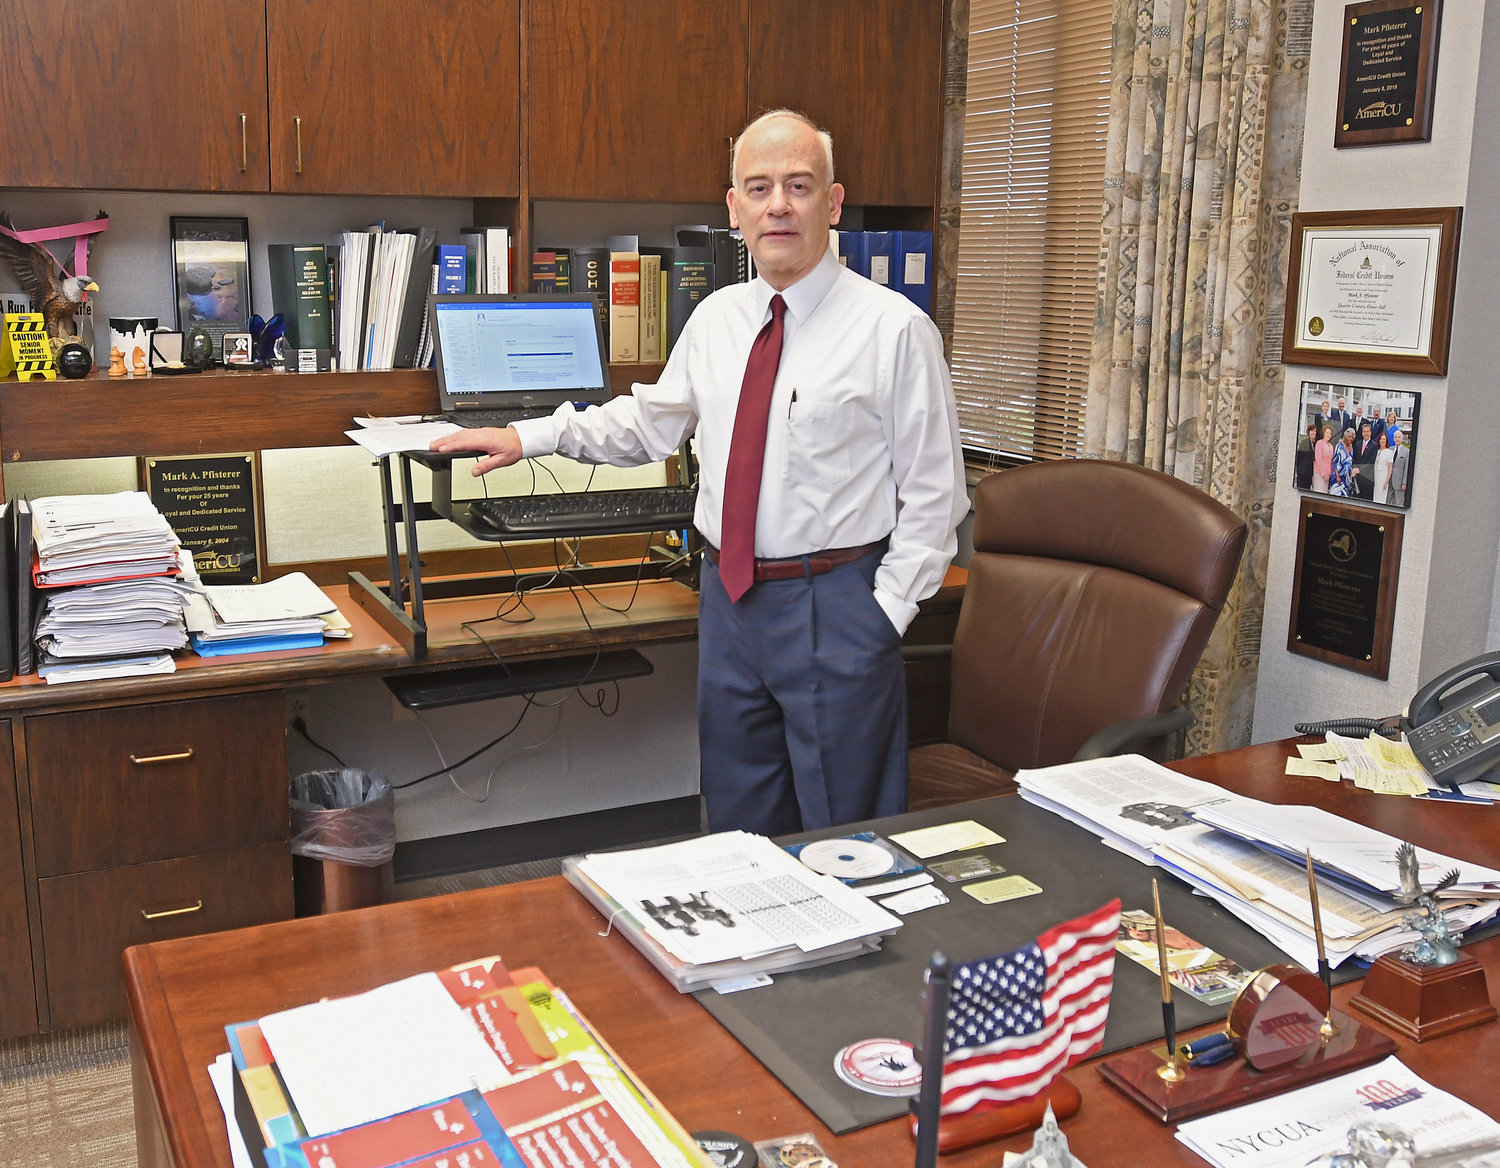 LOOKING FORWARD — Mark Pfisterer in his office after 42 years at AmeriCU. At some point this year, Pfisterer said he will officially retire and hand off the reins to a successor that is currently being sought.